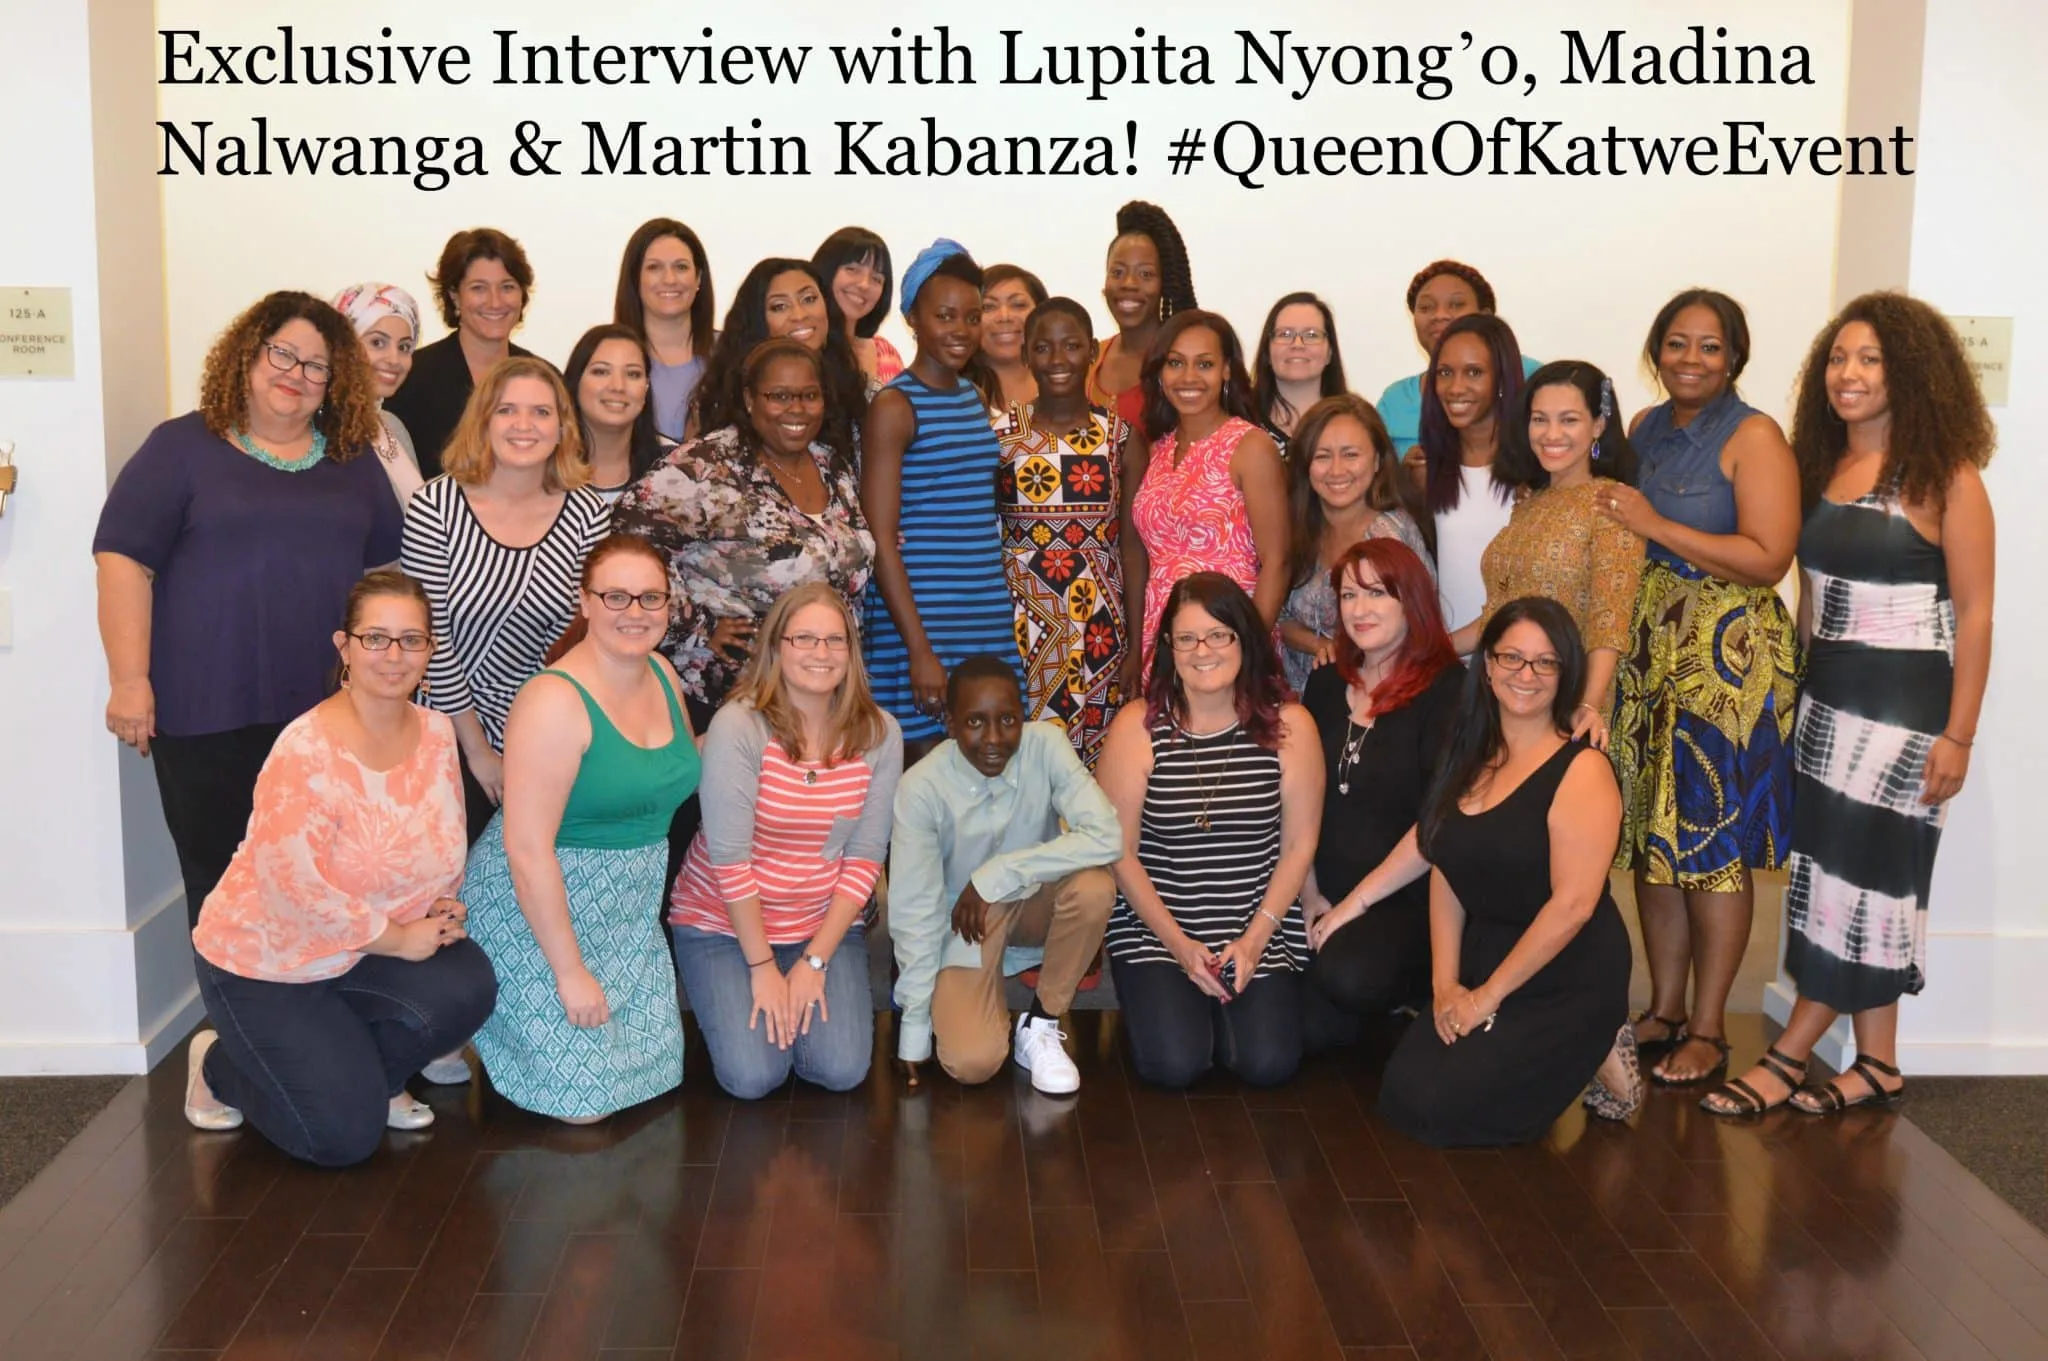 Interview with Lupita, Martin and Madina #QueenOfKatweEvent